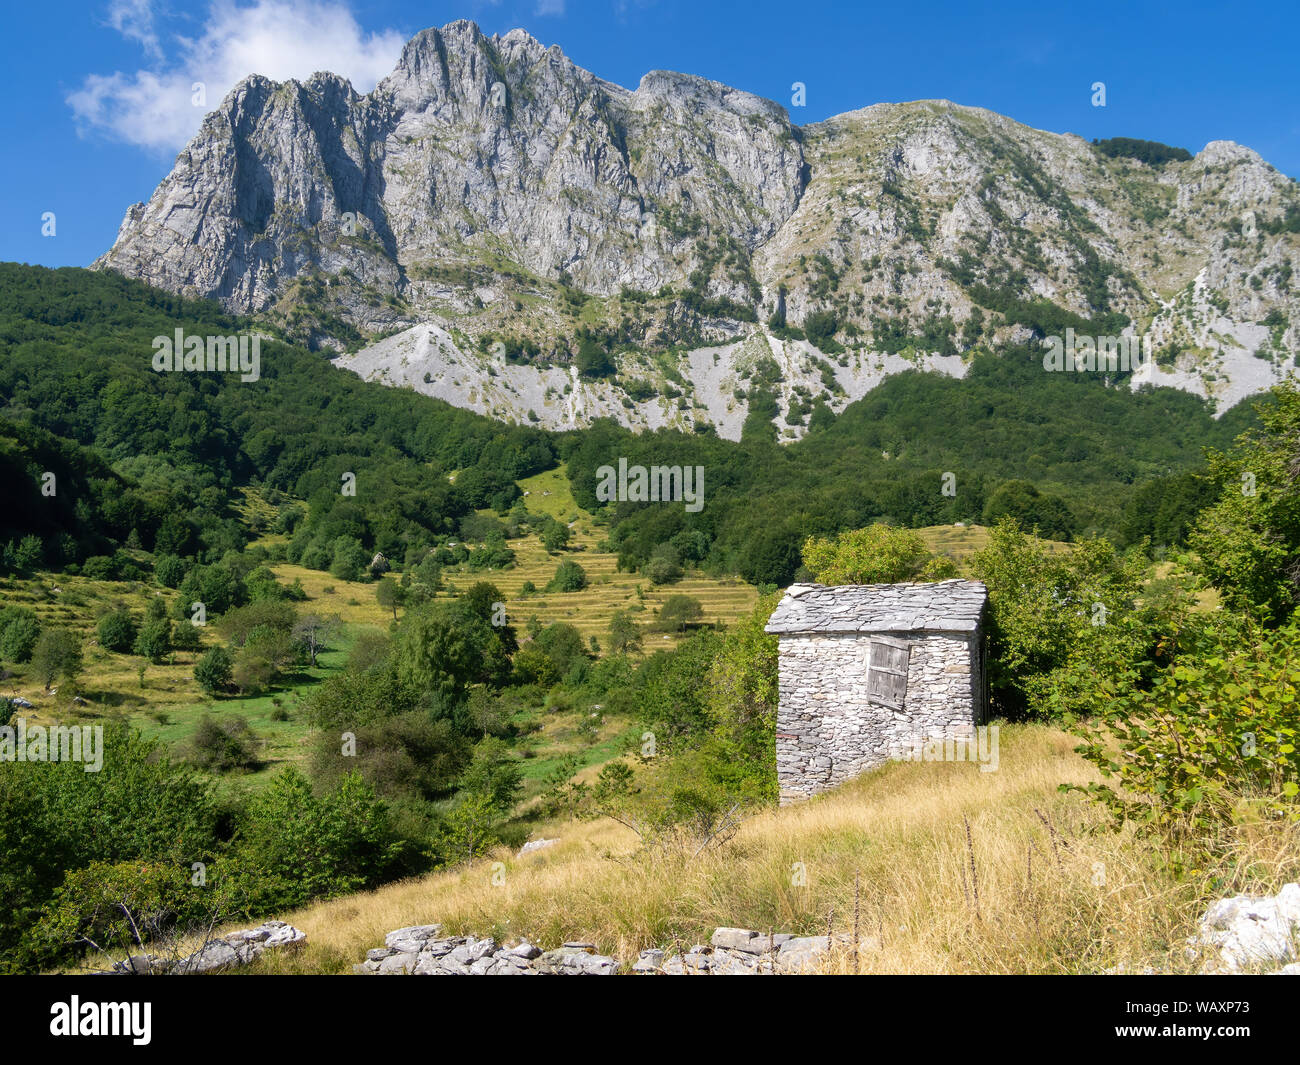 View of Campocatino in the Apuan Alps, aka Vagli Sotto. Beautiful forgotten gem in Garfagnana, Italy. Off the beaten track. Stock Photo